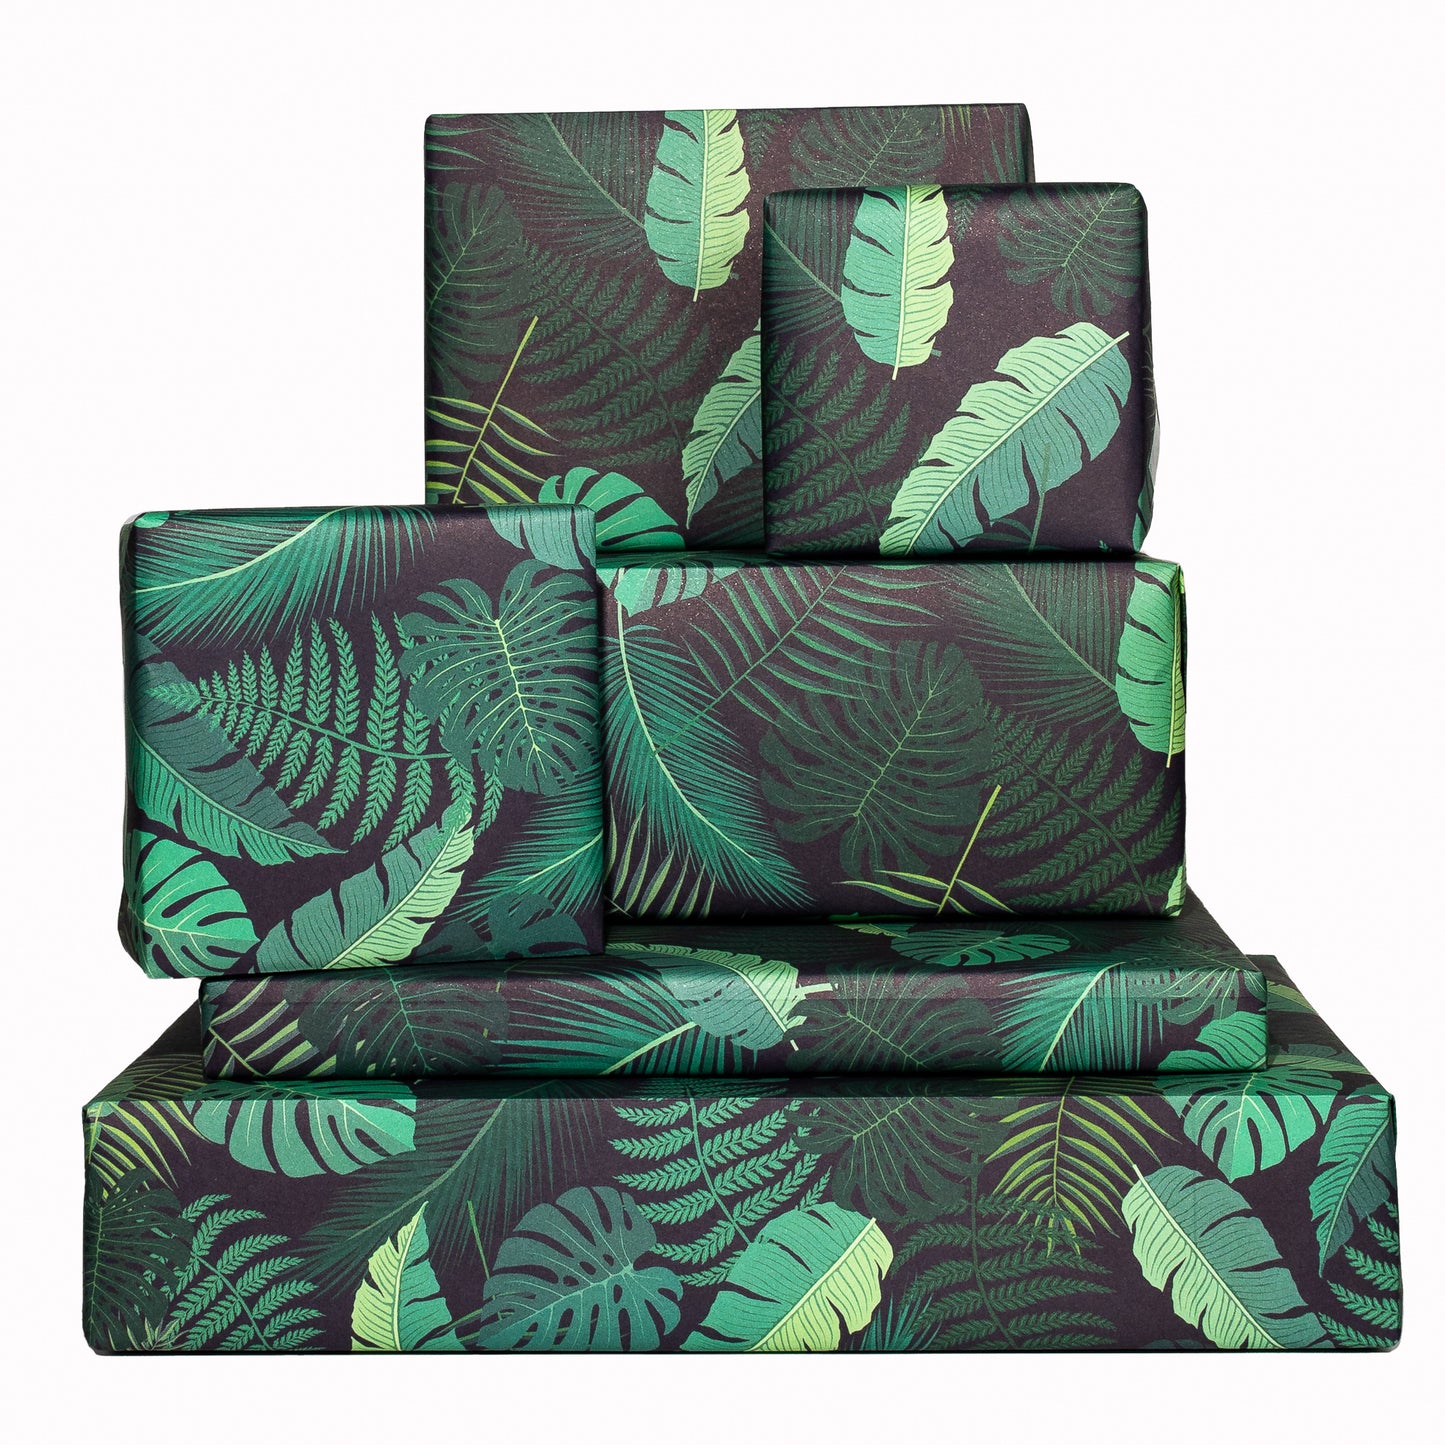 Monstera Wrapping Paper - 6 Sheets of Gift Wrap - 'Monstera' - Black Gift Wrap - For Men Women Him her